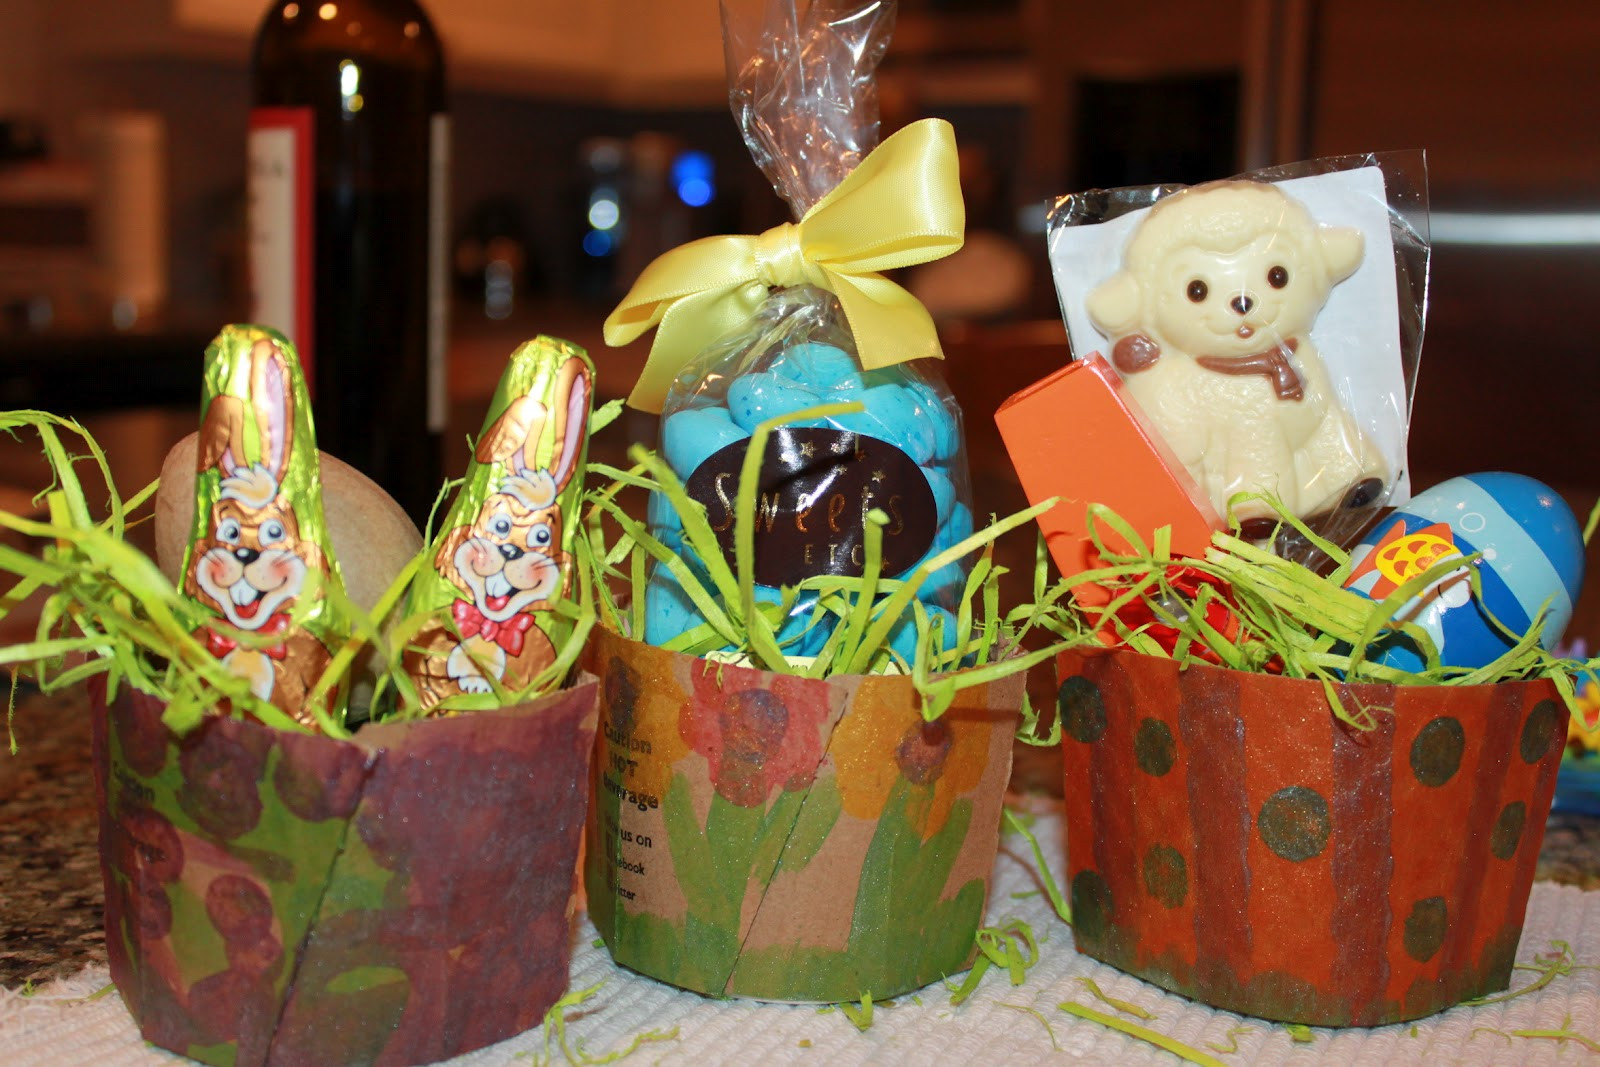 Easter Basket Arts And Crafts
 Green Owl Art Coffee cup Easter basket craft